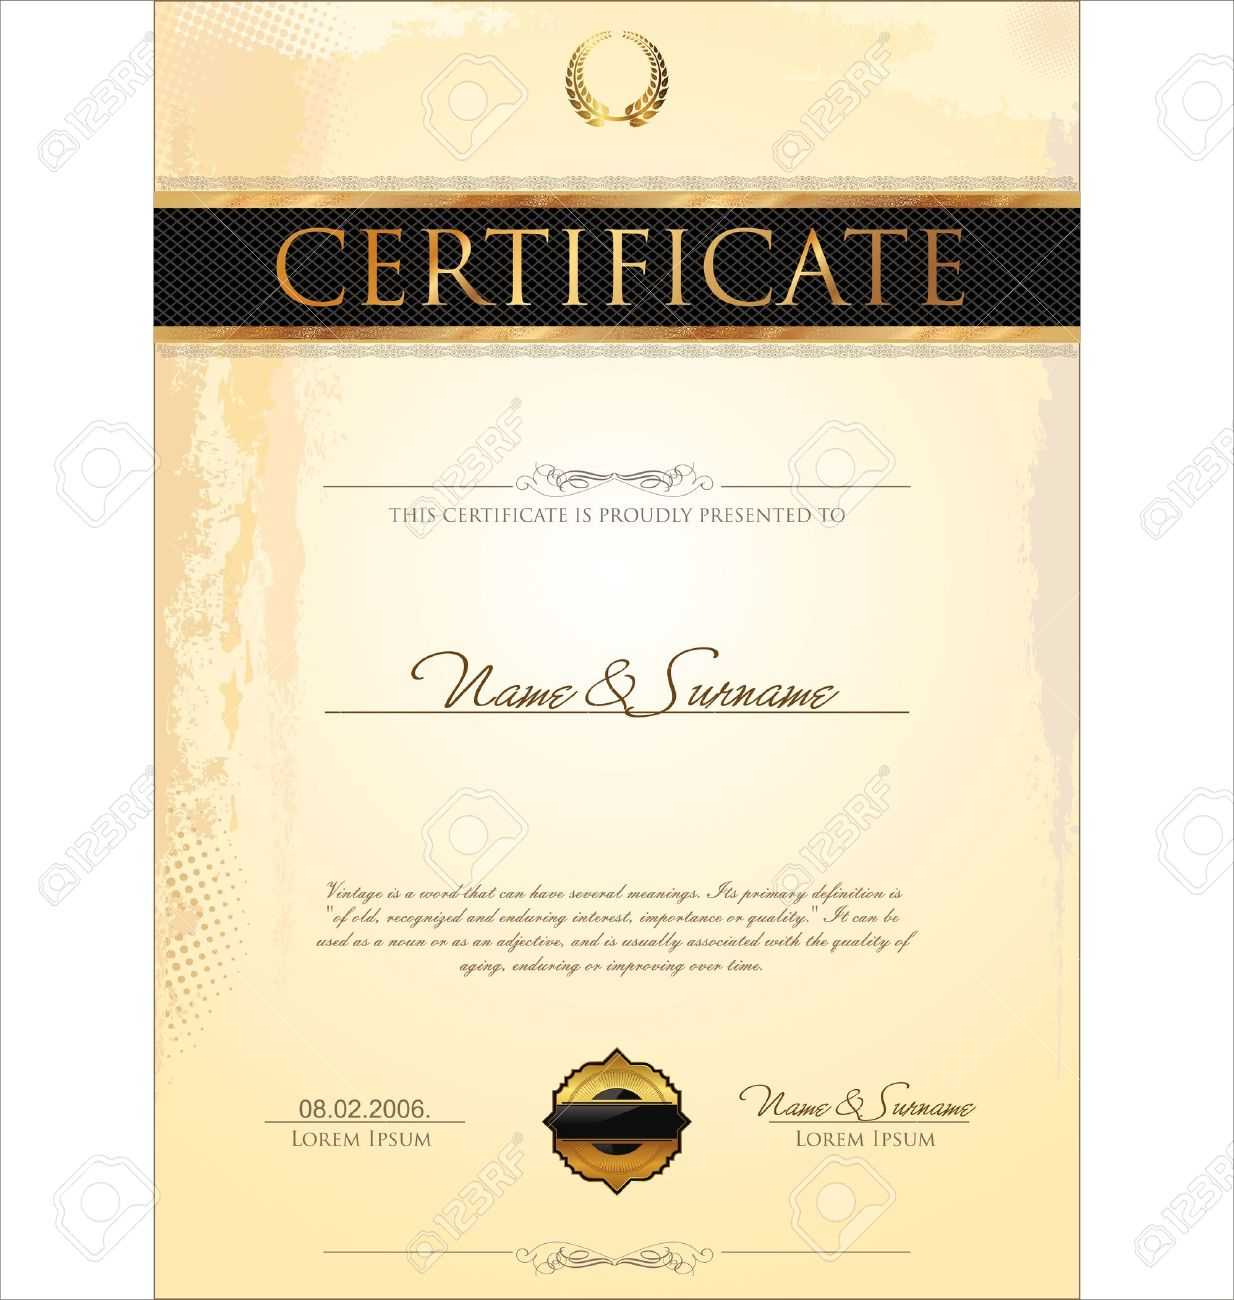 Certificate Template Pertaining To Free Stock Certificate Template Download